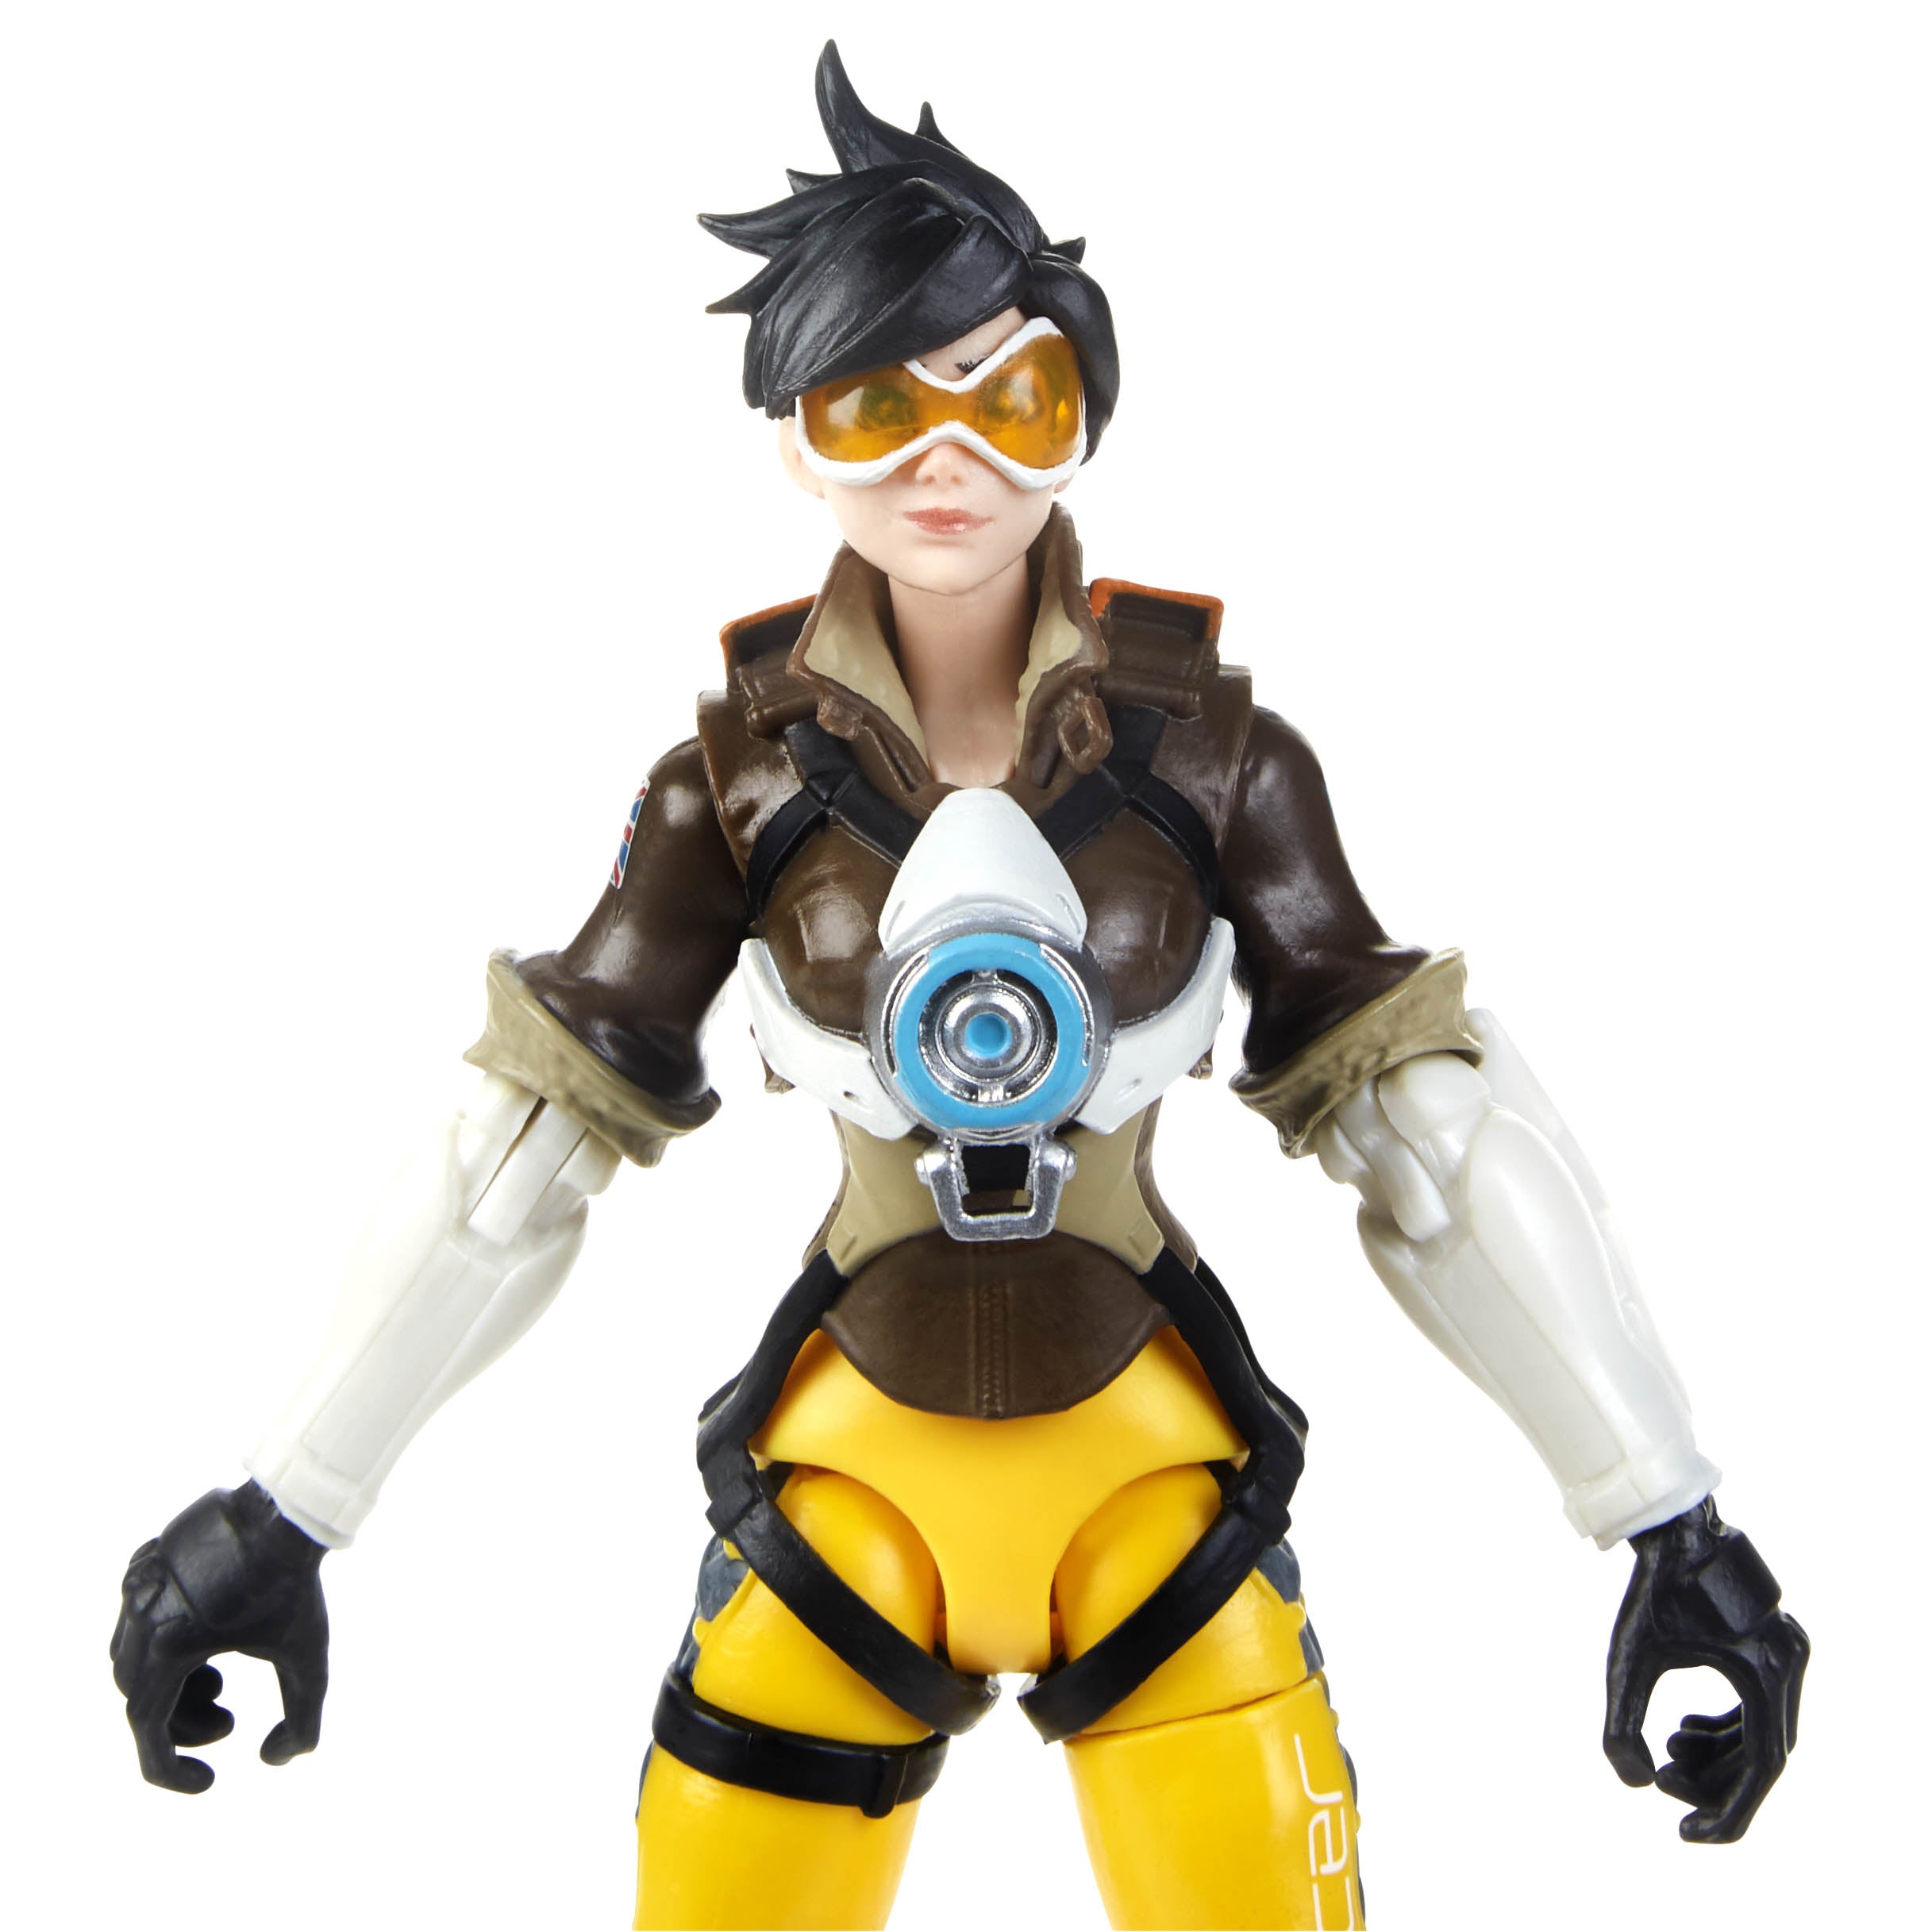 Hasbro - Overwatch Ultimate Series - Blackwatch Reyes (Reaper), Lucio, Sombra, and Tracer - Marvelous Toys